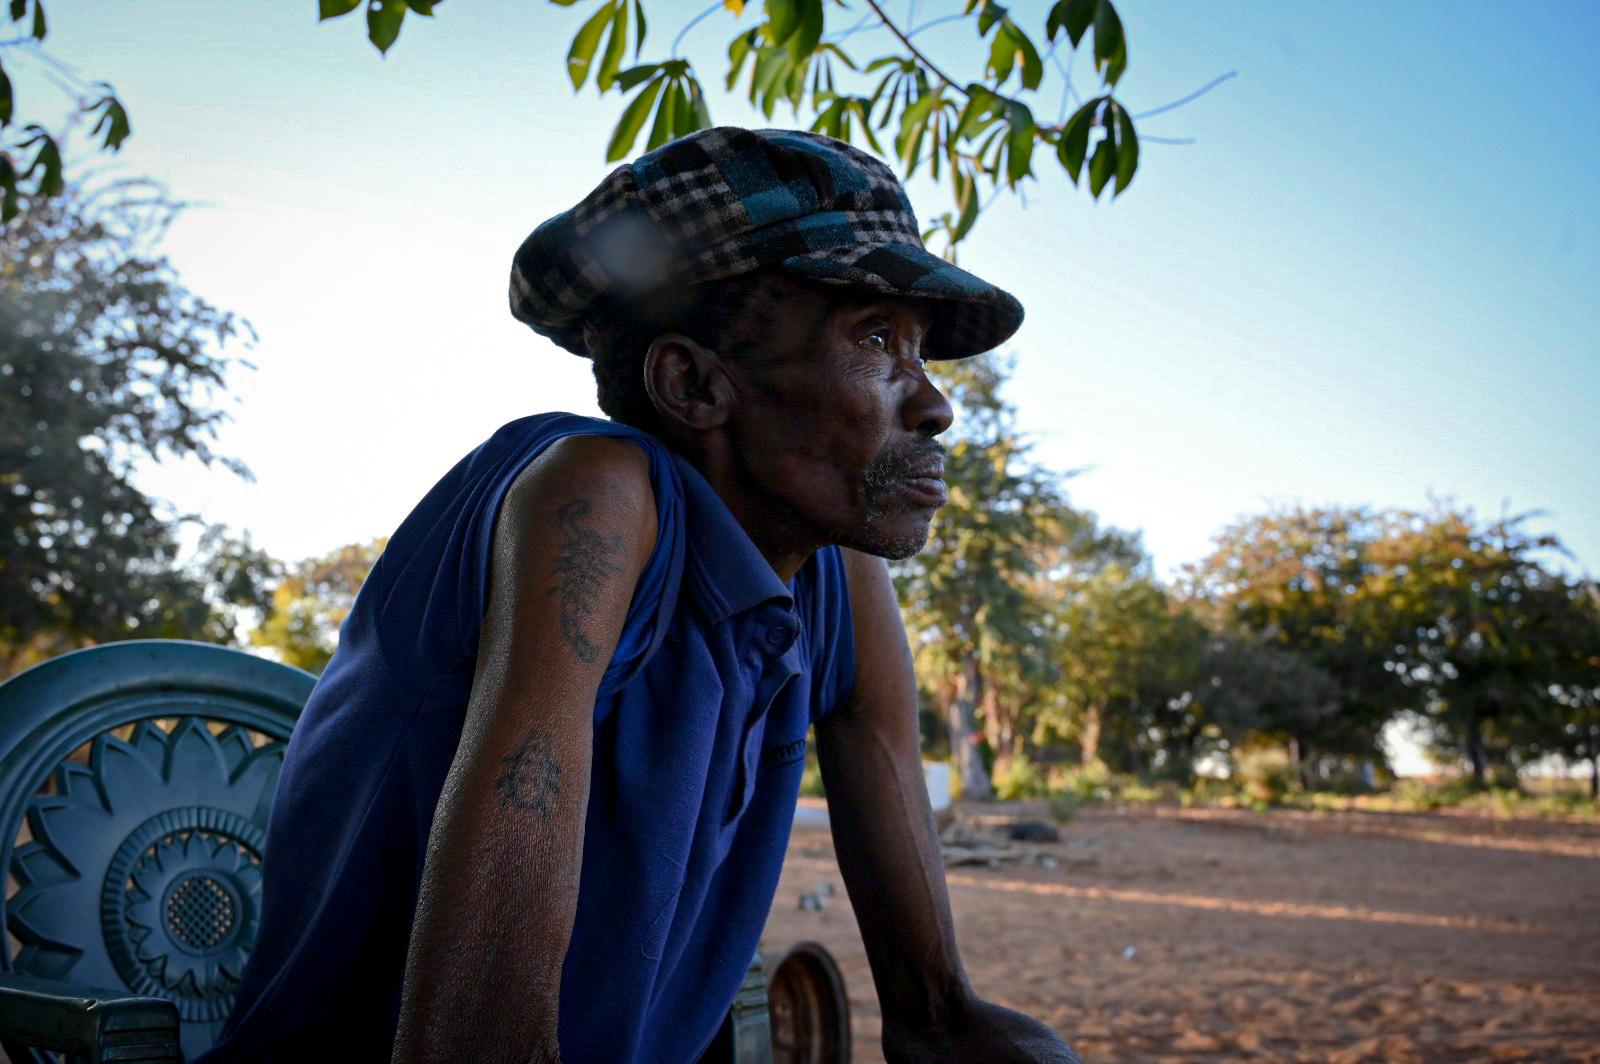 Namibia's first people: the last stand